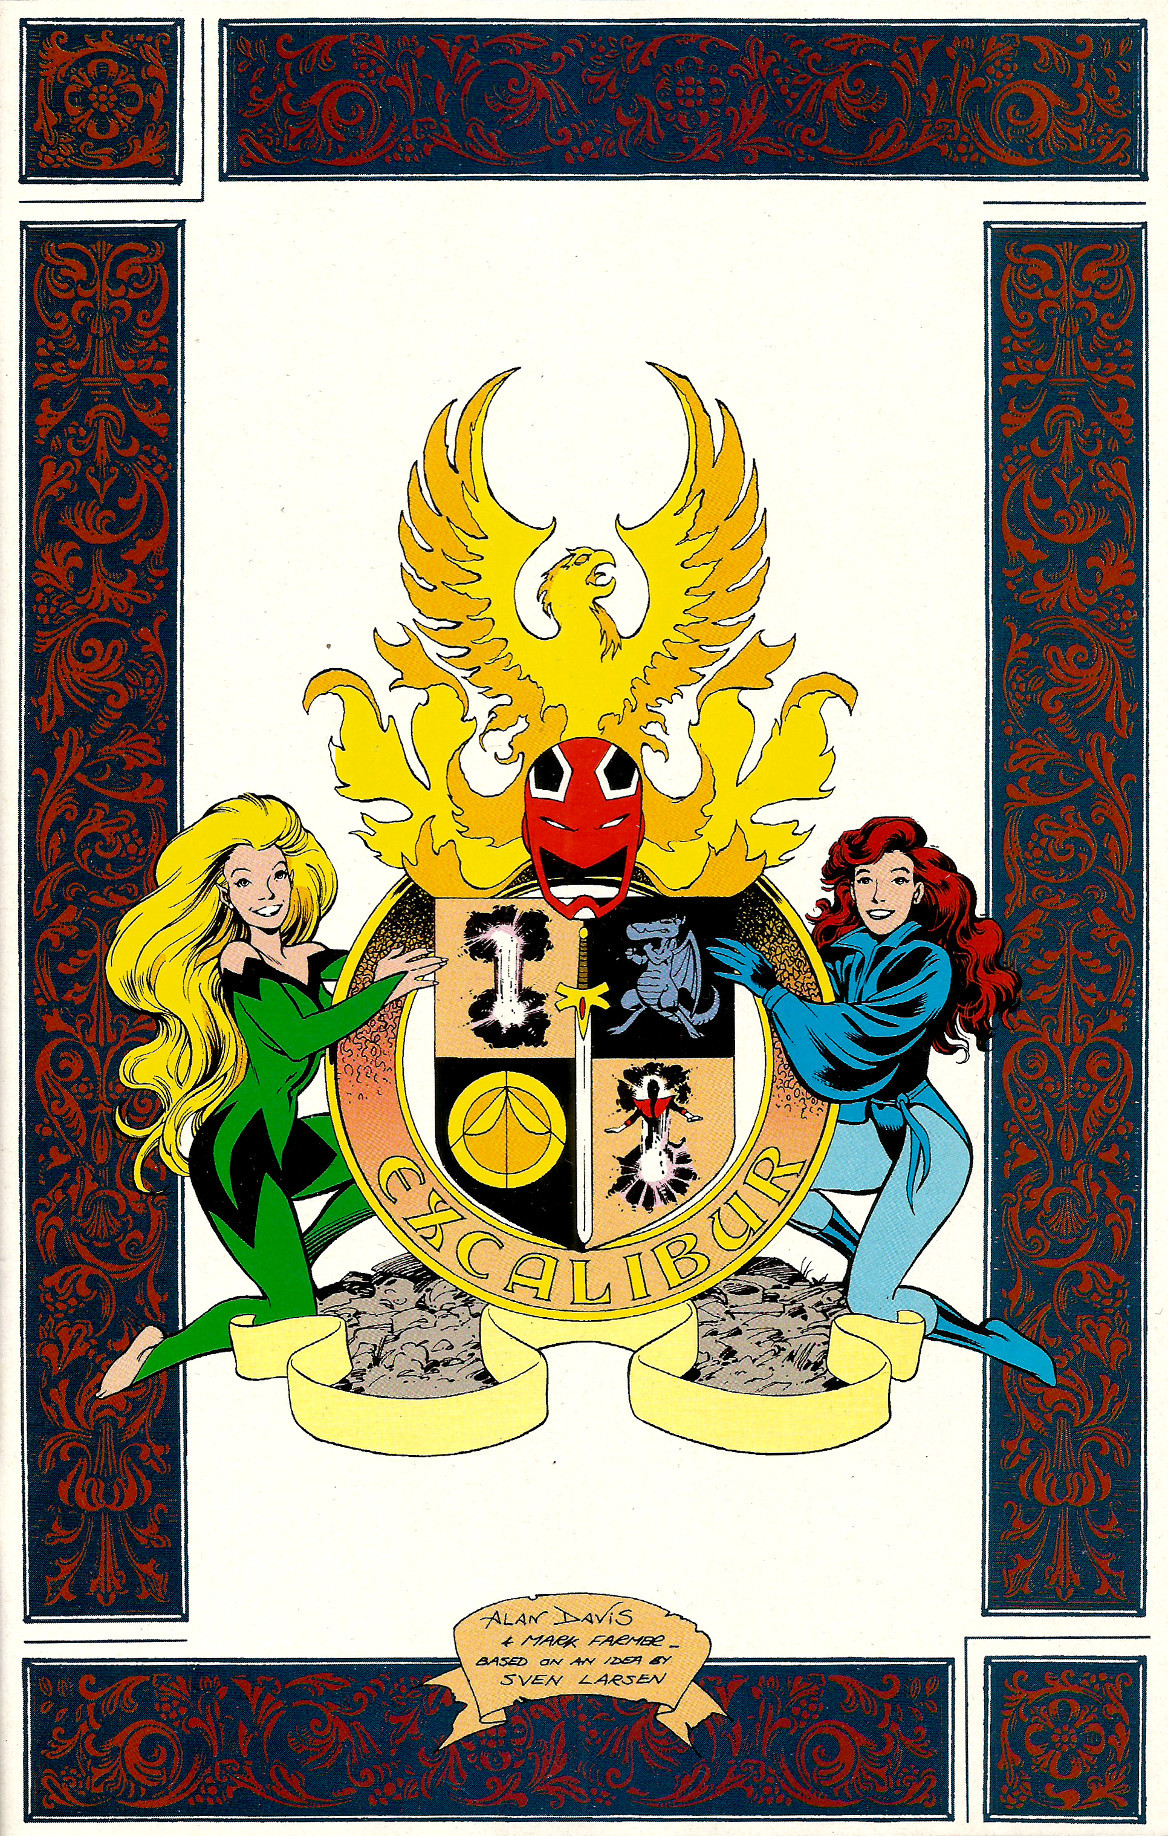 Frontispiece from Excalibur No. 50 (Marvel Comics, 1992). Art by Alan Davis and Mark